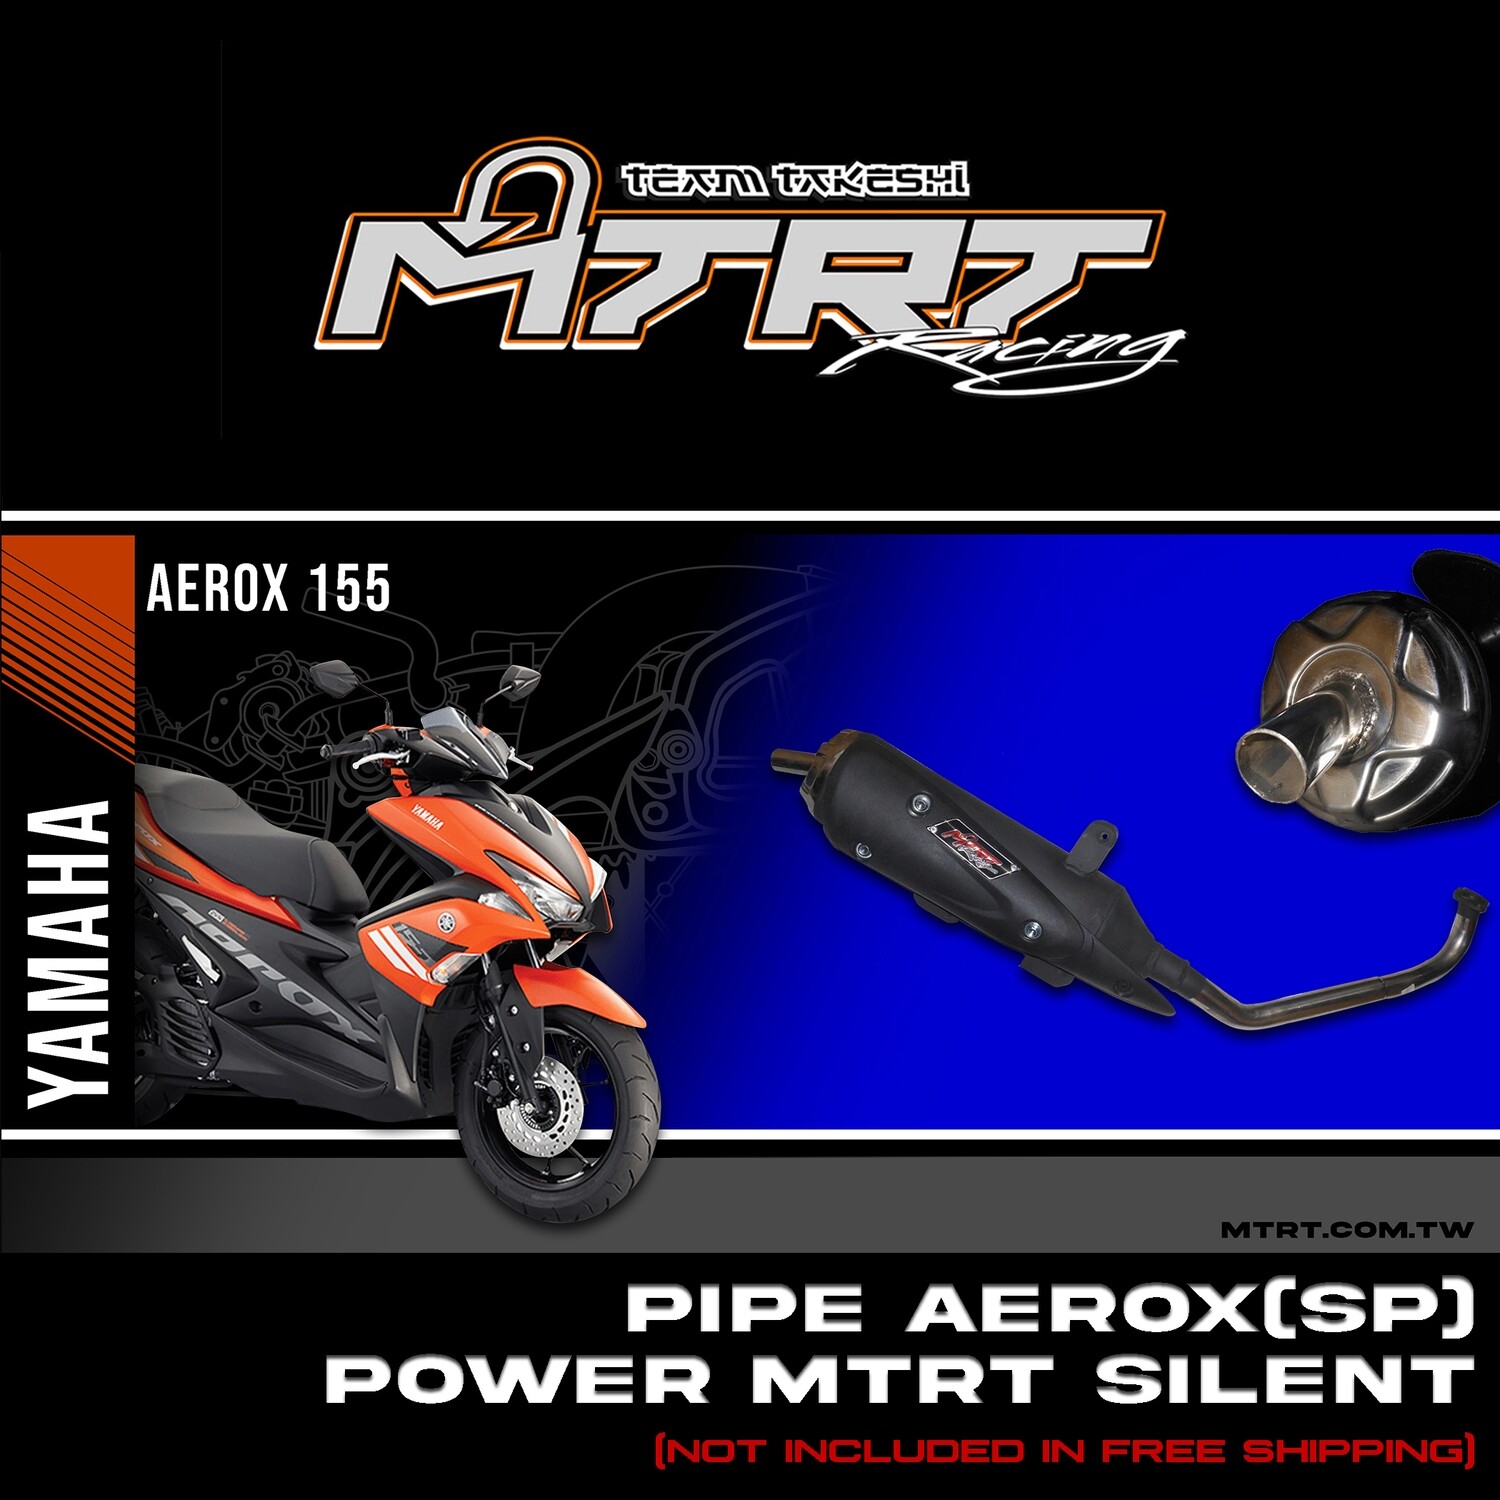 PIPE AEROX  SP POWER MTRT SILENT